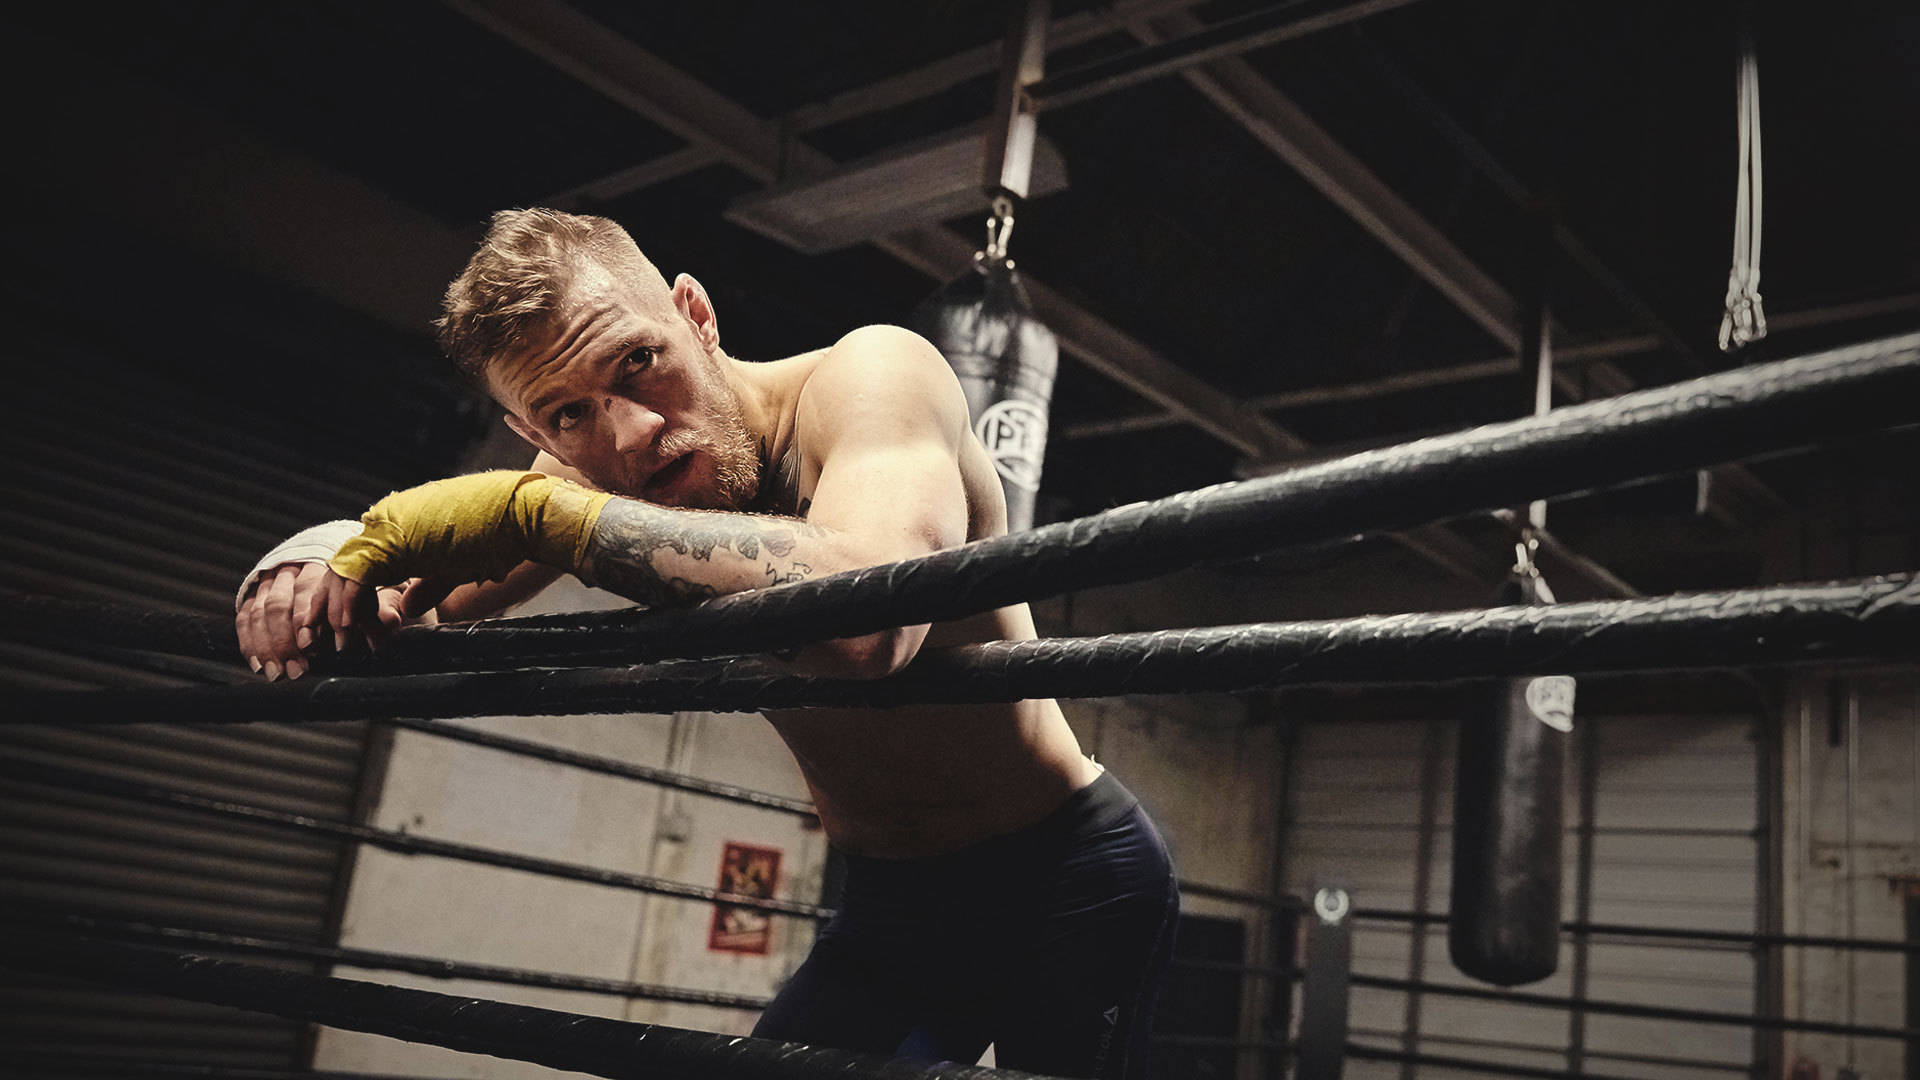 Conor Mcgregor In Boxing Ring Background